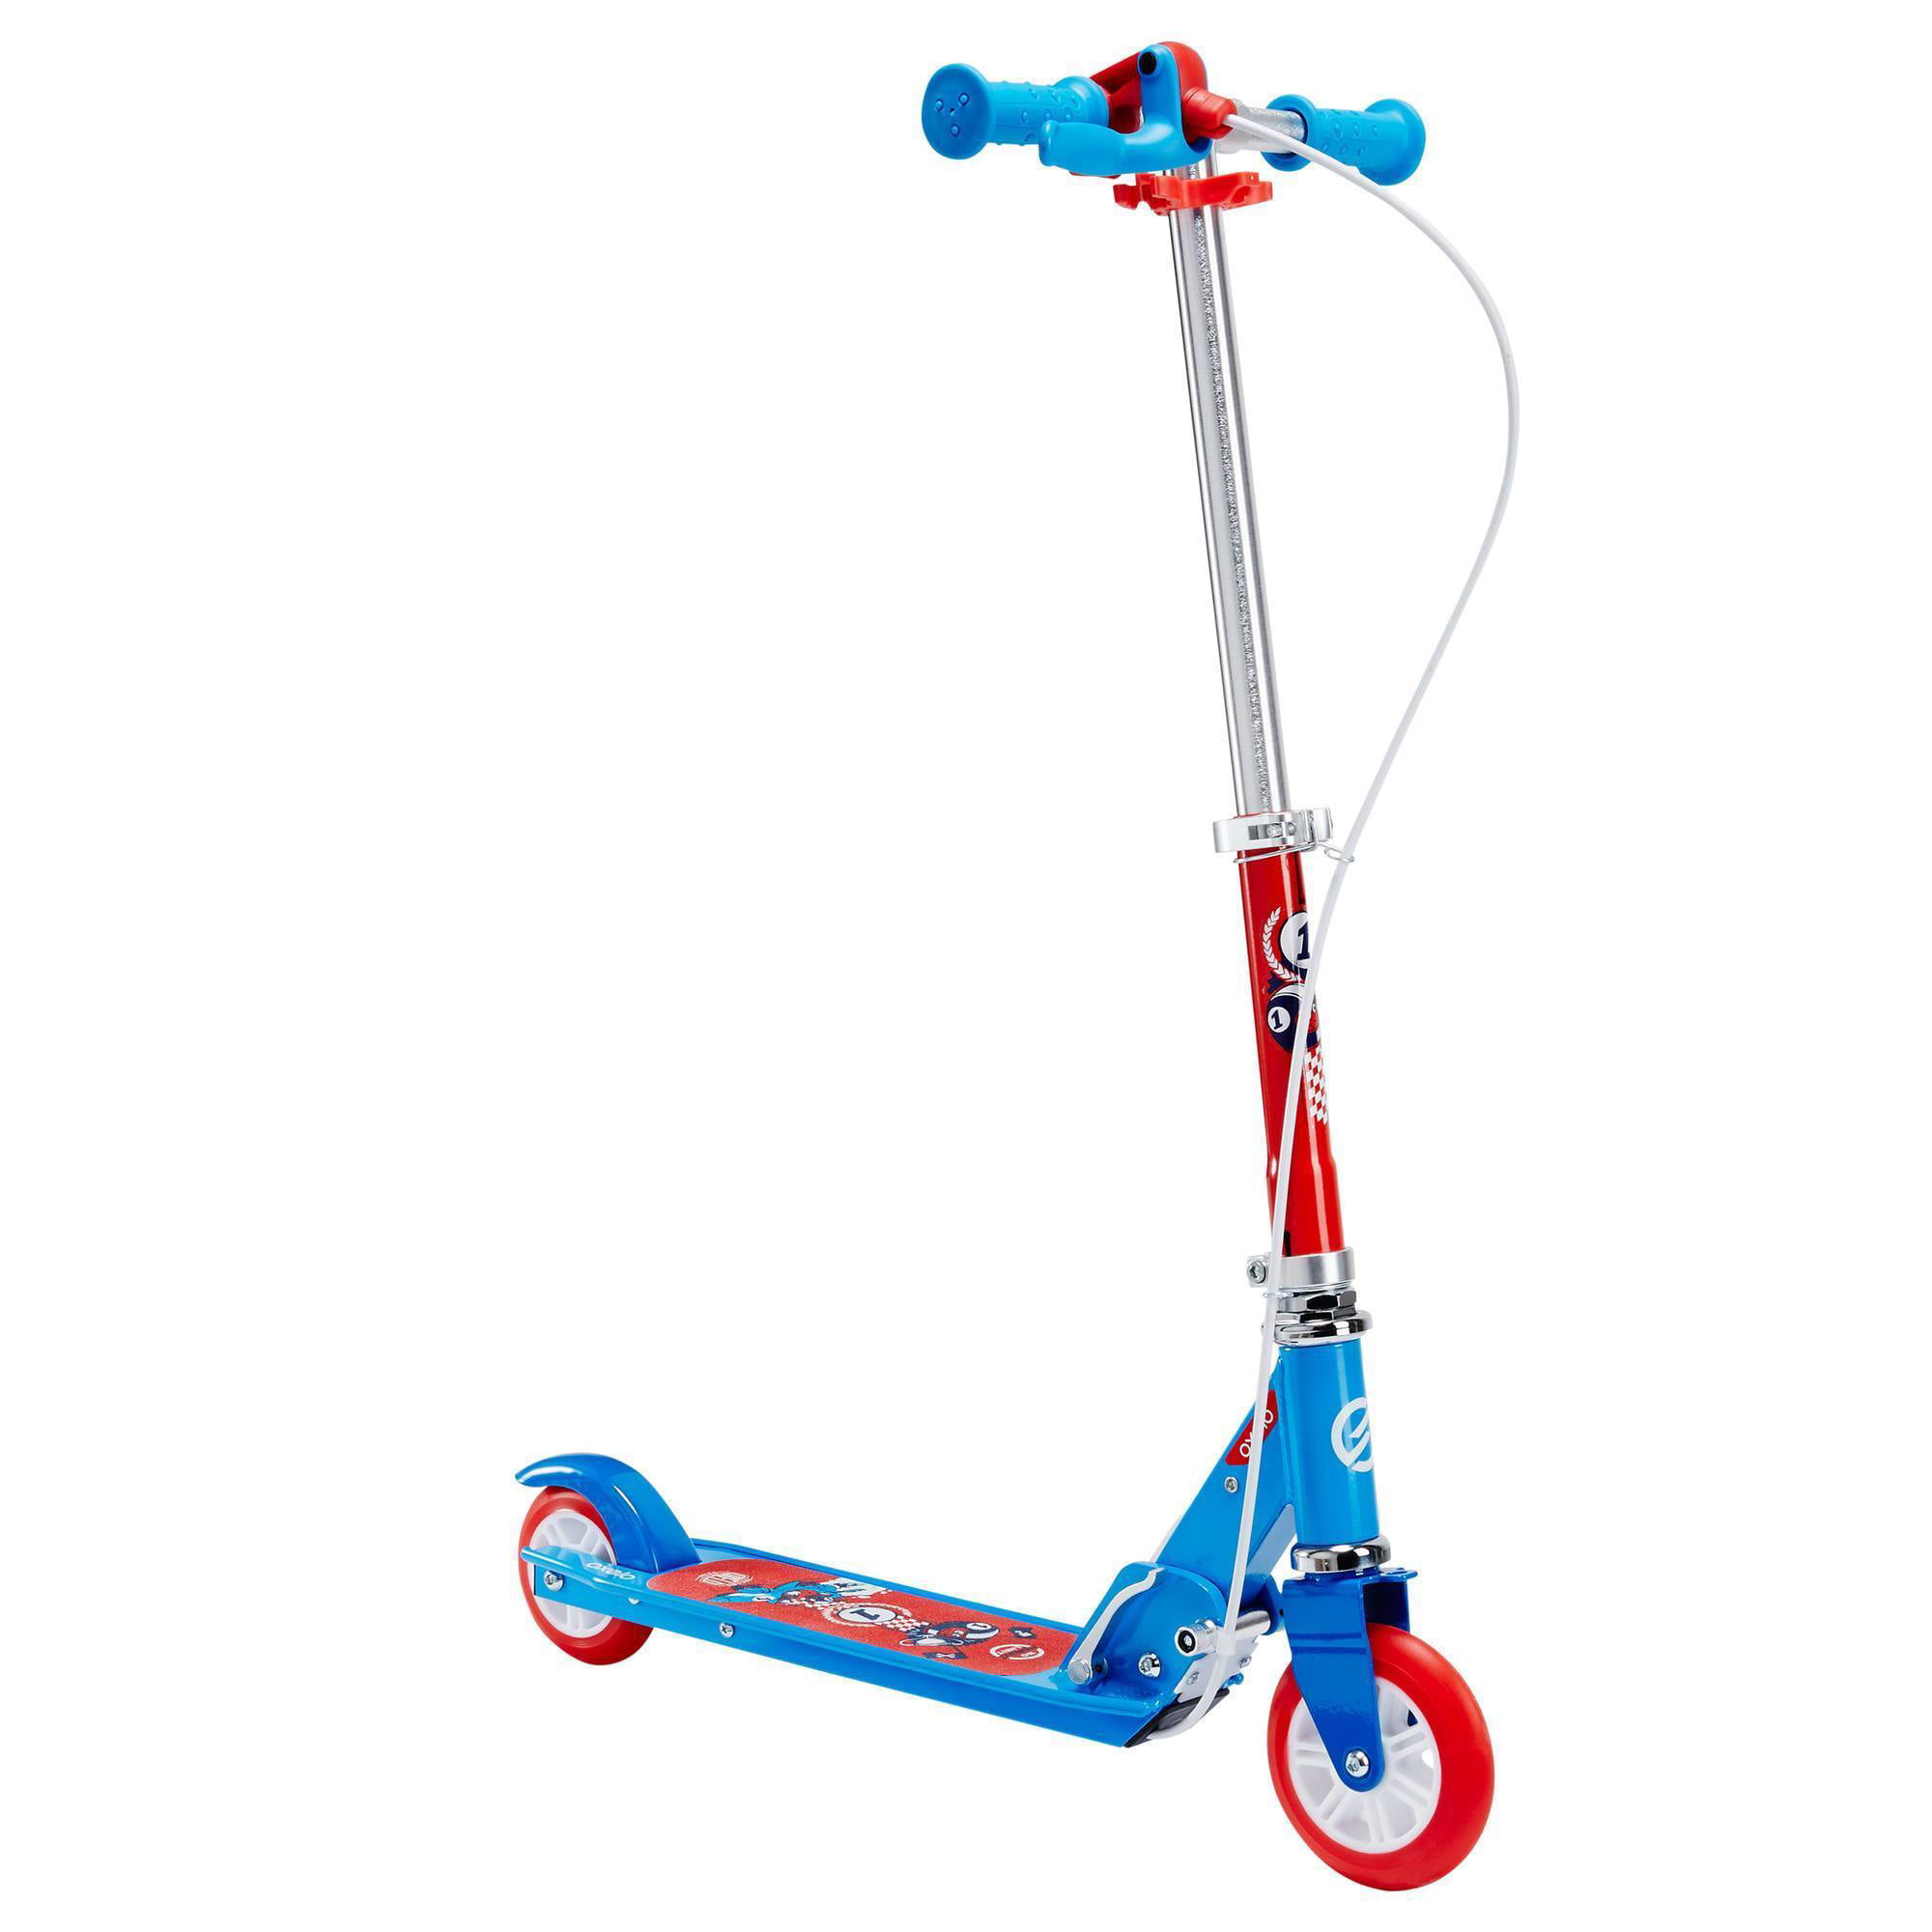 Oxelo by DECATHLON - Children's Scooter 